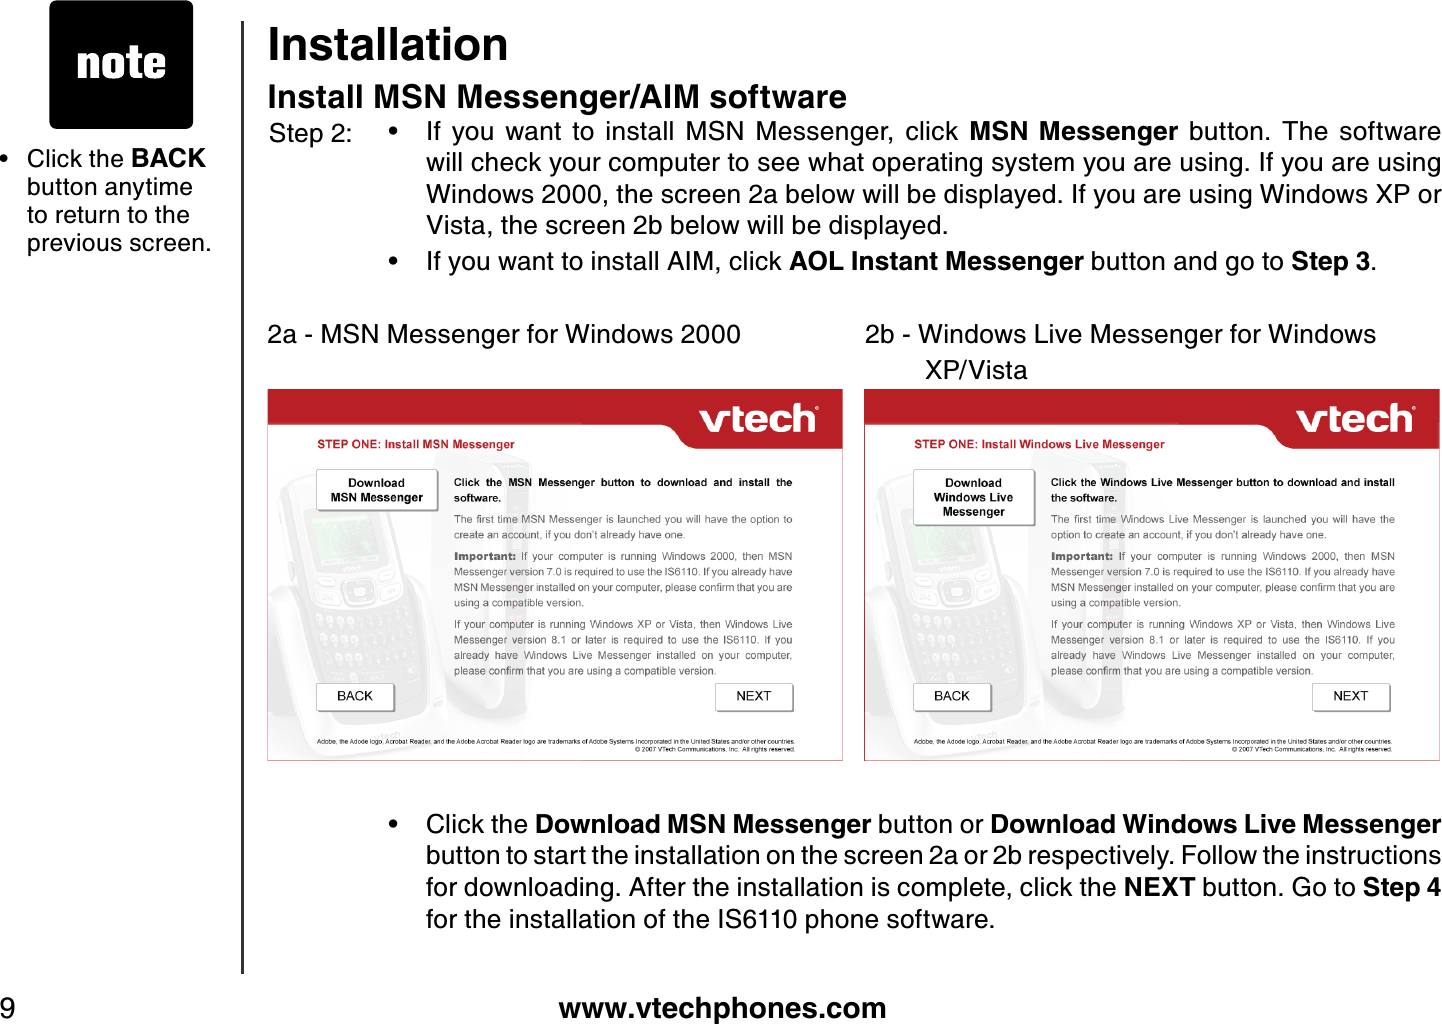 www.vtechphones.com9InstallationInstall MSN Messenger/AIM softwareIf  you  want  to  install  MSN  Messenger,  click  MSN Messenger  button.  The  software will check your computer to see what operating system you are using. If you are using Windows 2000, the screen 2a below will be displayed. If you are using Windows XP or Vista, the screen 2b below will be displayed.If you want to install AIM, click AOL  Instant Messenger button and go to Step 3.2a - MSN Messenger for Windows 2000                 2b - Windows Live Messenger for Windows                       XP/VistaClick the D ownload MSN Messenger button or D ownload Windows L ive Messengerbutton to start the installation on the screen 2a or 2b respectively. Follow the instructions for downloading. After the installation is complete, click the NEXT button. G o to Step 4for the installation of the IS6110 phone software.•••Step 2:Click the BACKbutton anytime to return to the previous screen.•